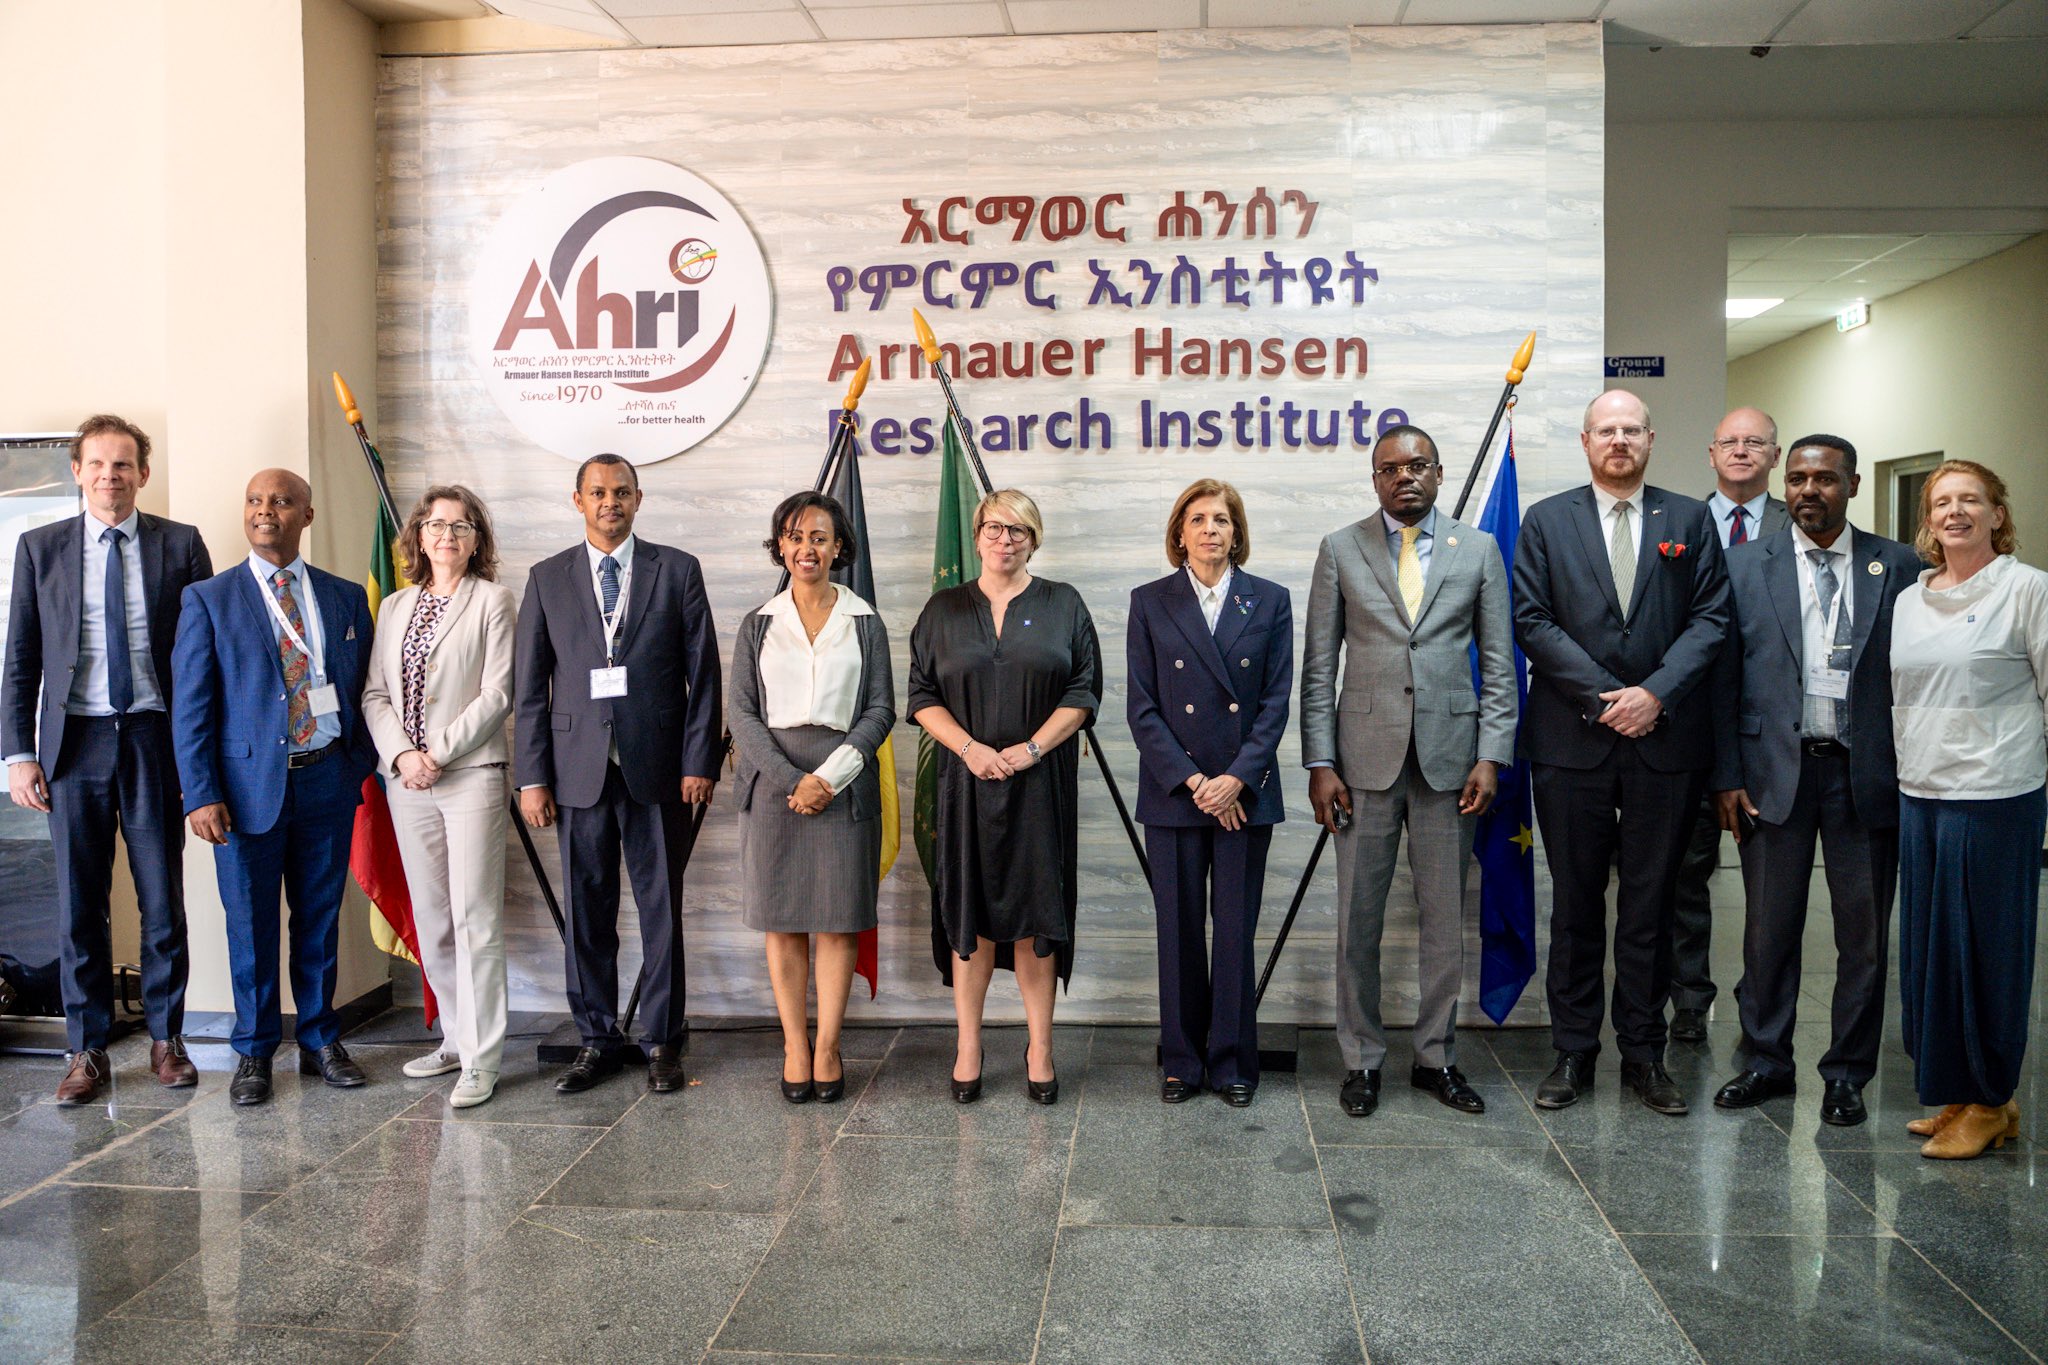 Team Europe visits Addis Ababa, Ethiopia, to strenghten Africa-EU cooperation on health